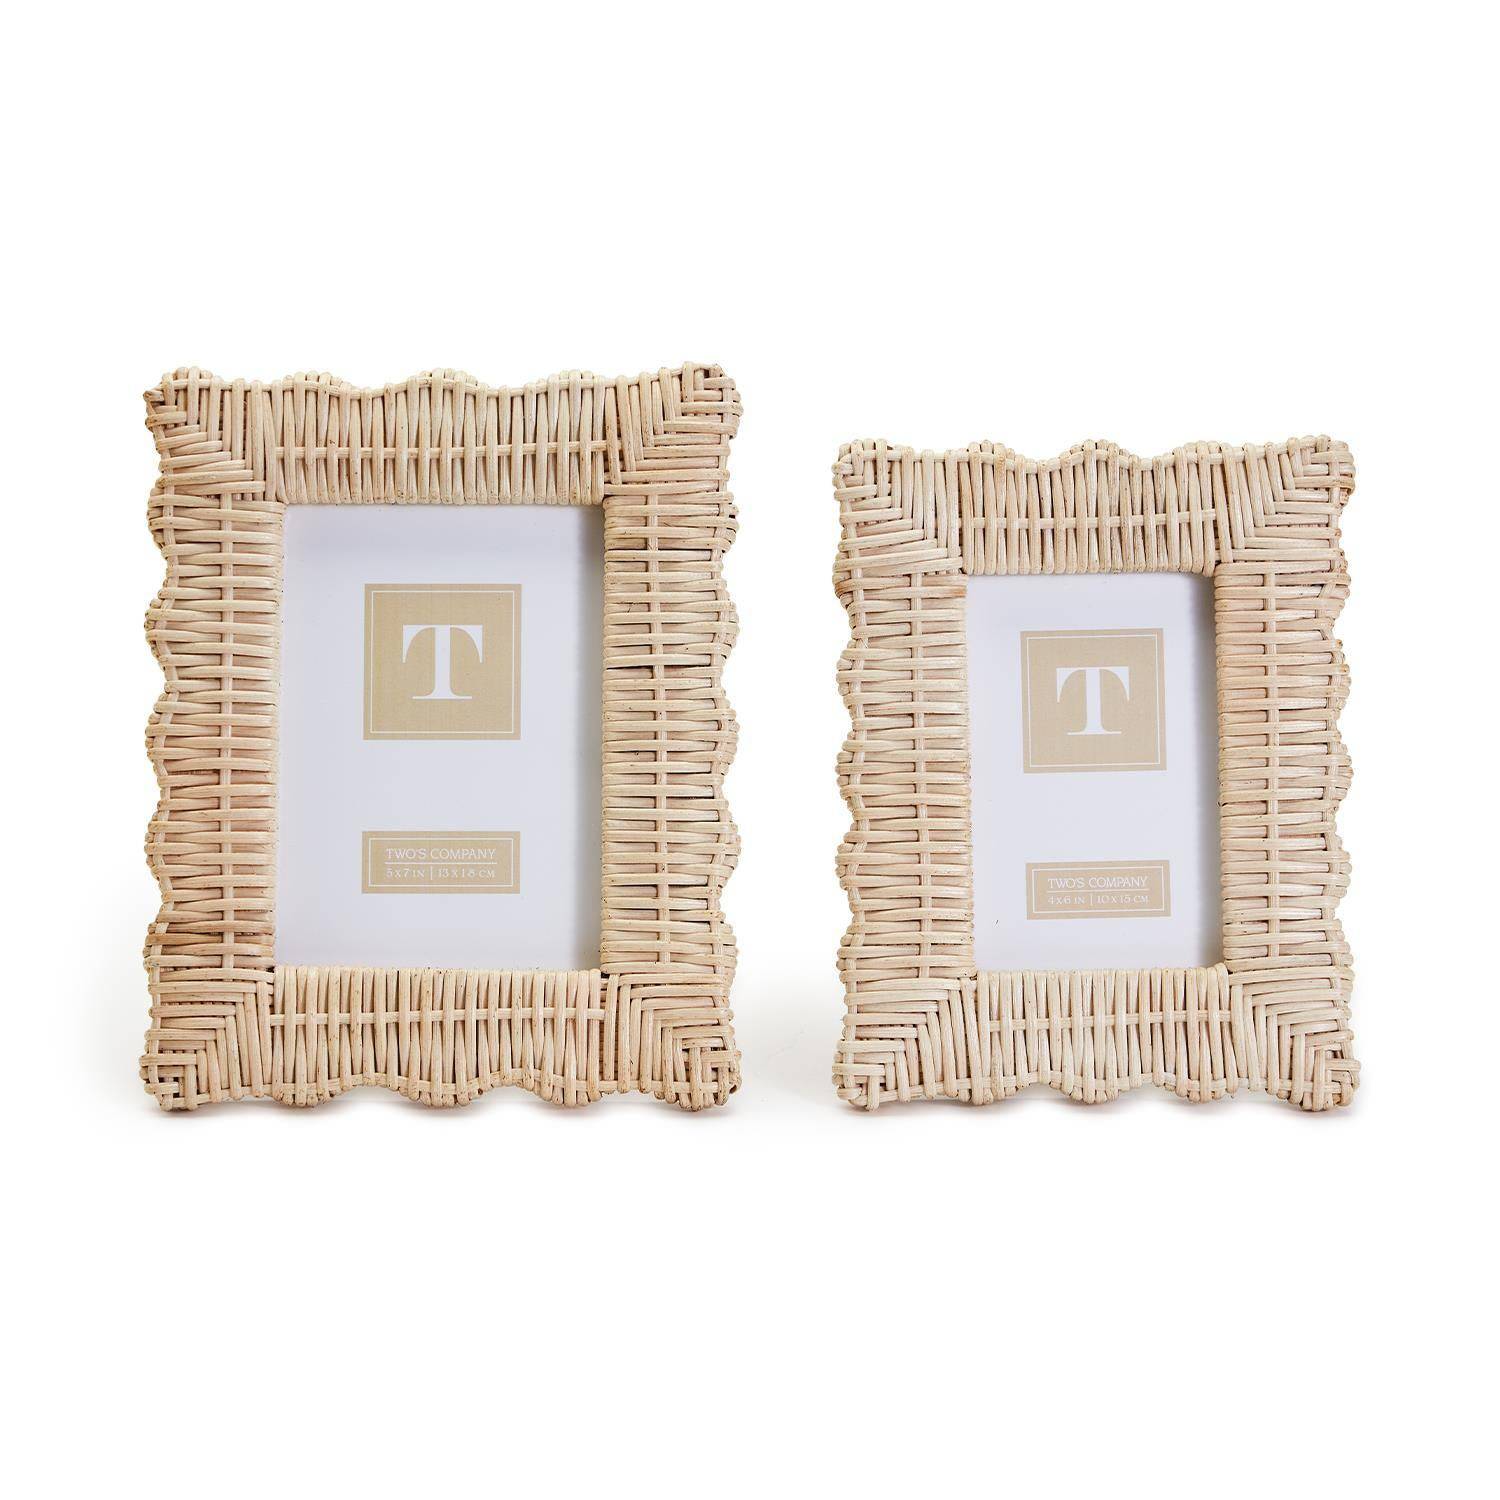 Wicker Weave Picture Frame - 2 sizes available - The Preppy Bunny